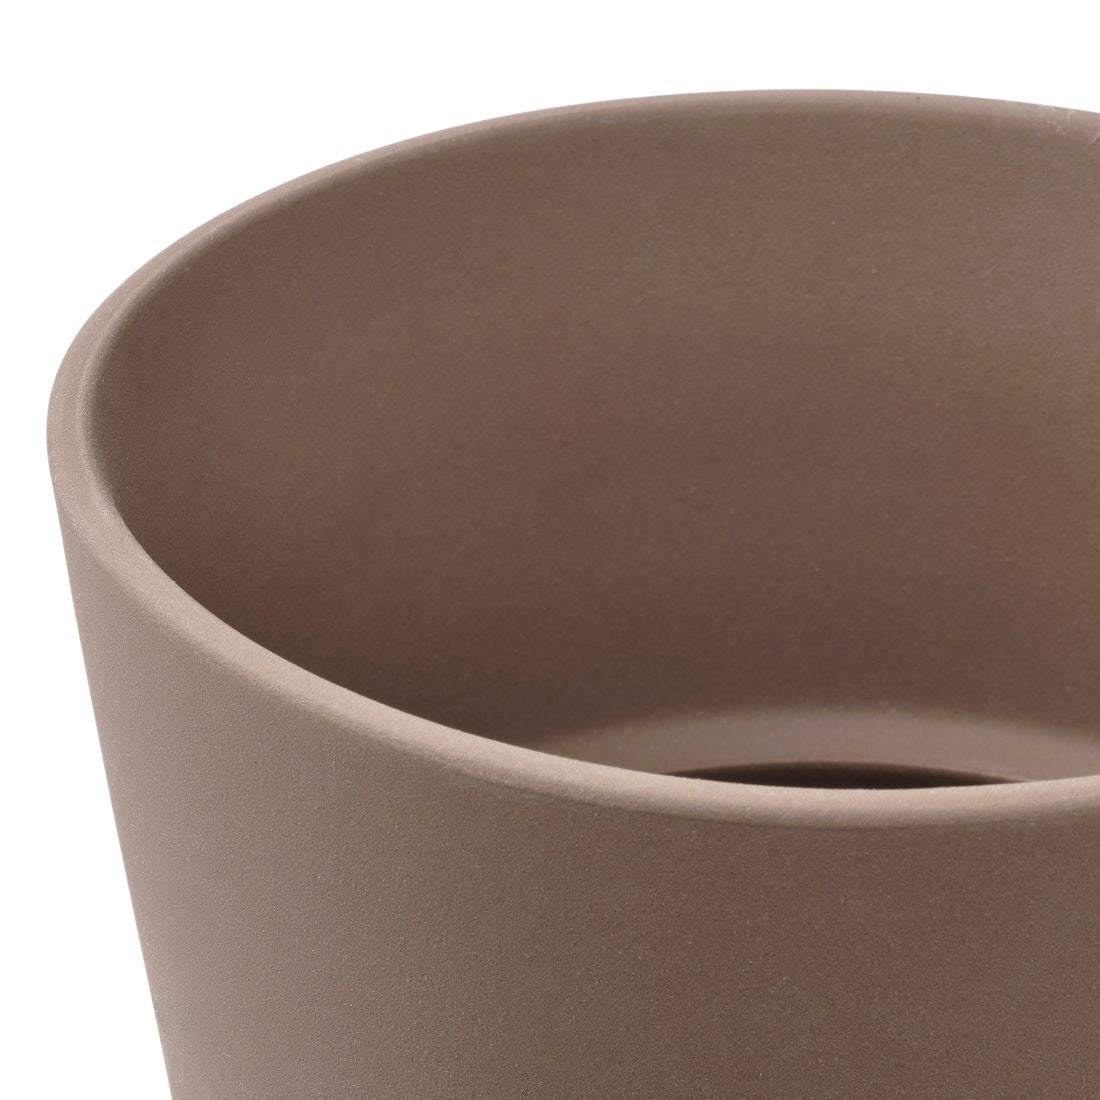 Ceramic Brown Planter Pot with Plate